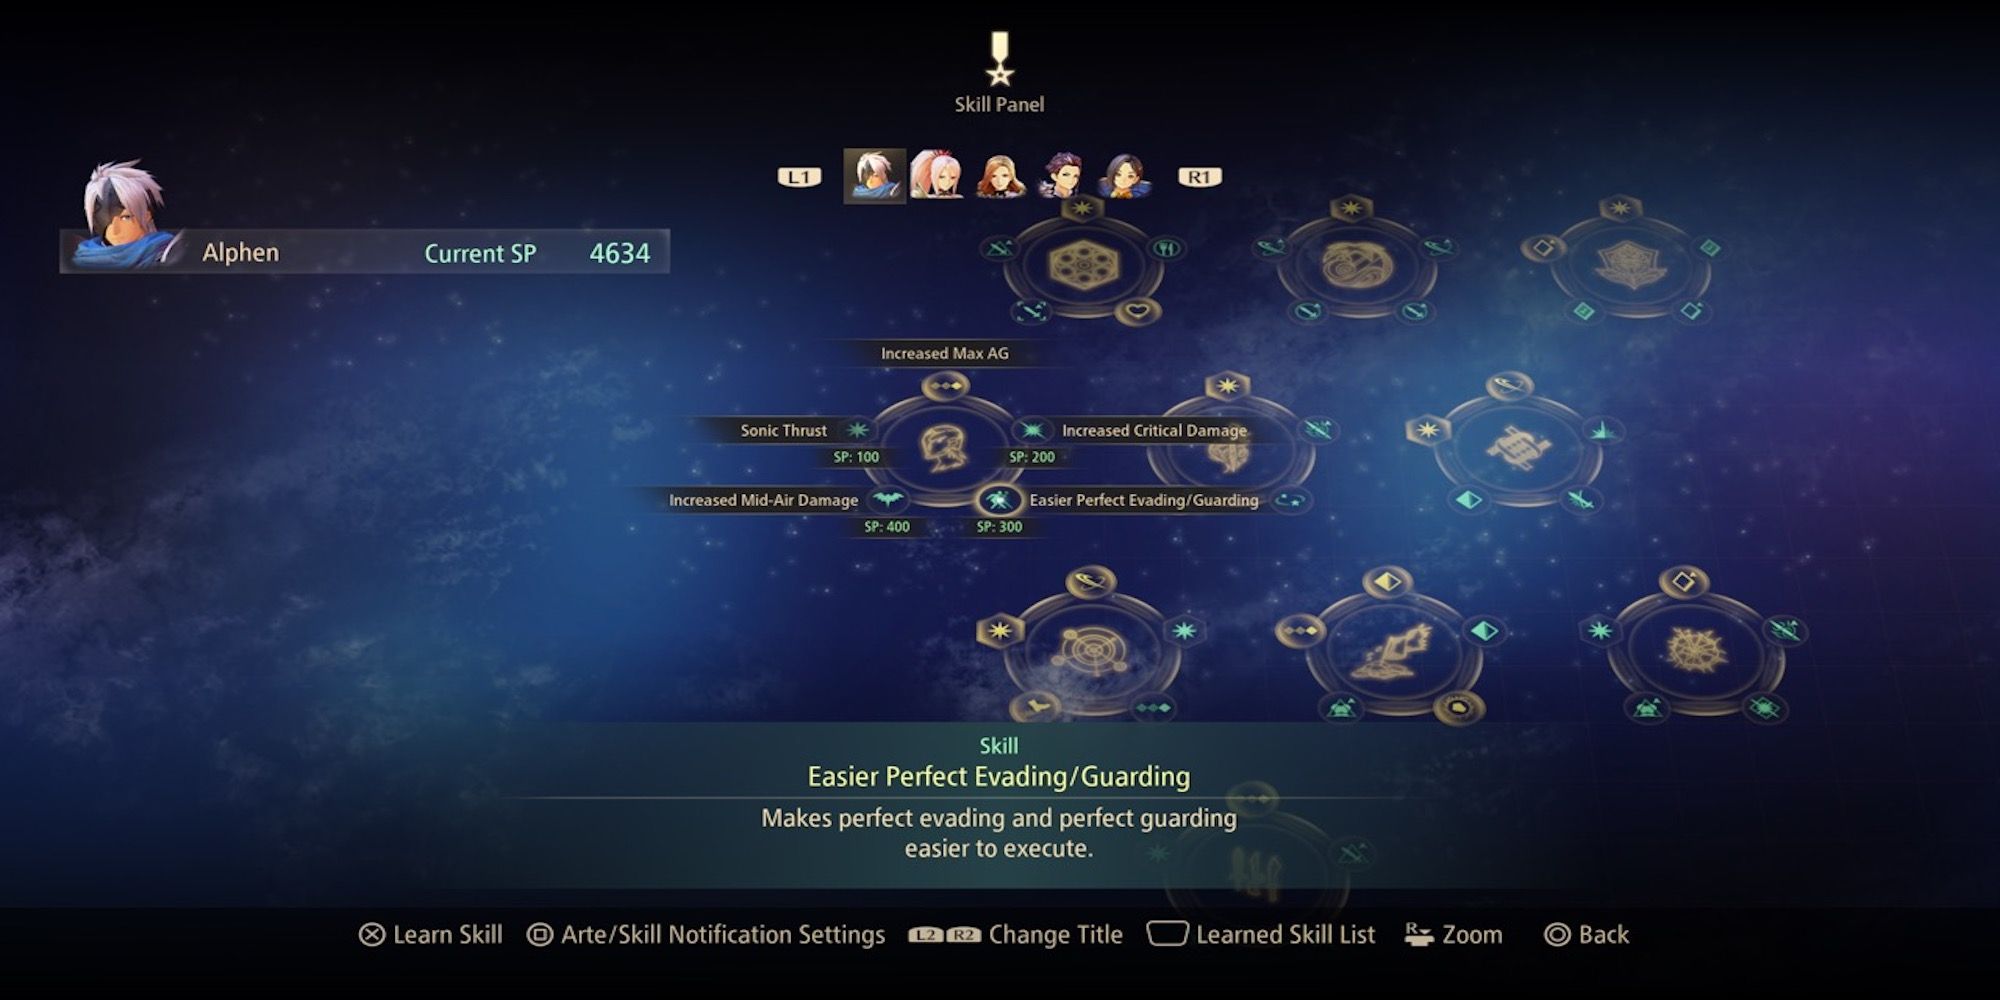 Easier Perfect Evading/Guarding skill in skill menu from Tales of Arise